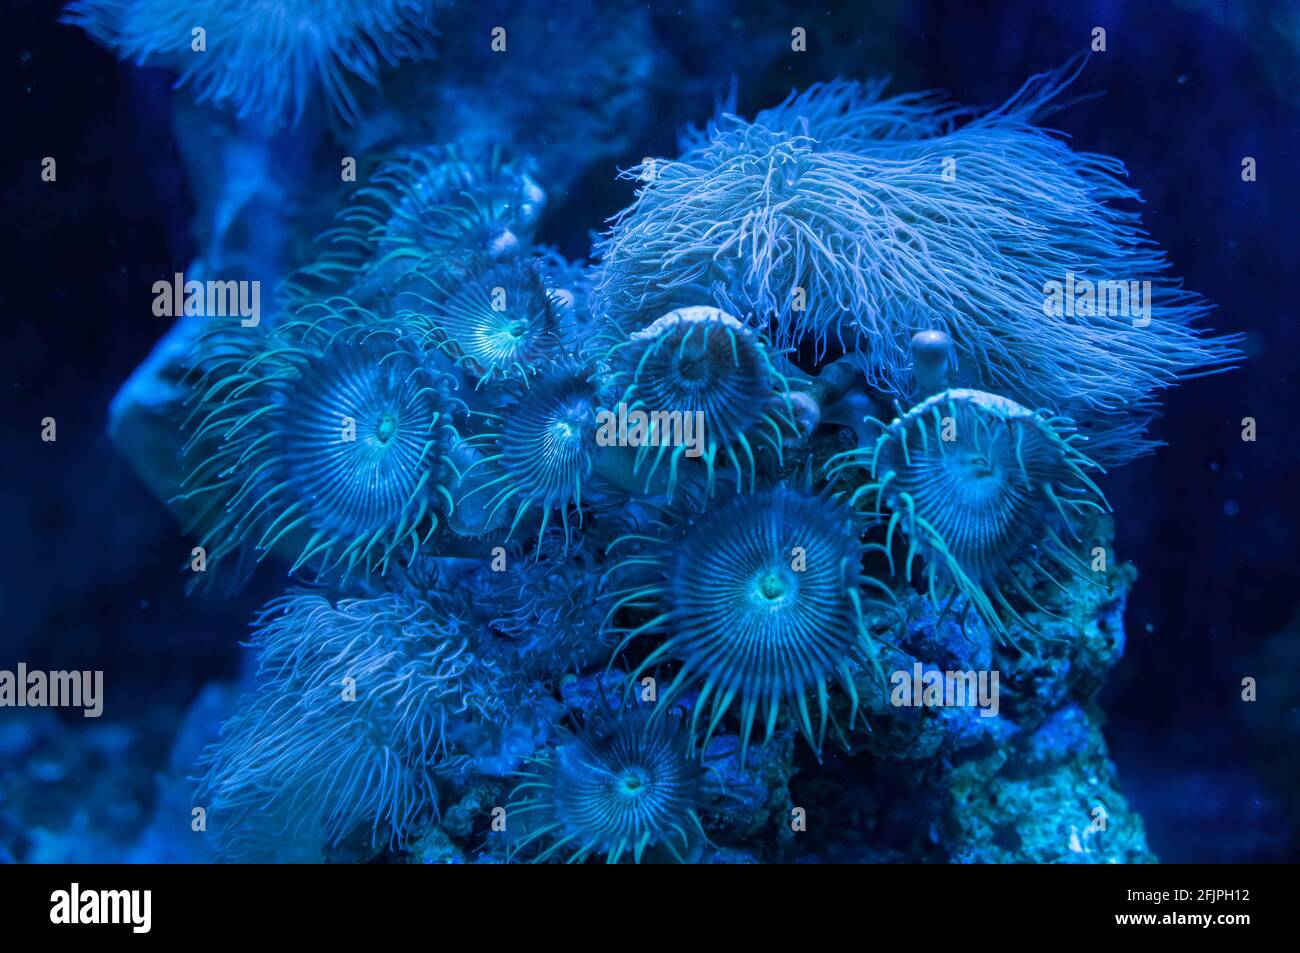 A Coral reef of Sea anemones (predatory animals of the order Actiniaria), part of the underwater decoration of one of the marine water tanks. Stock Photo